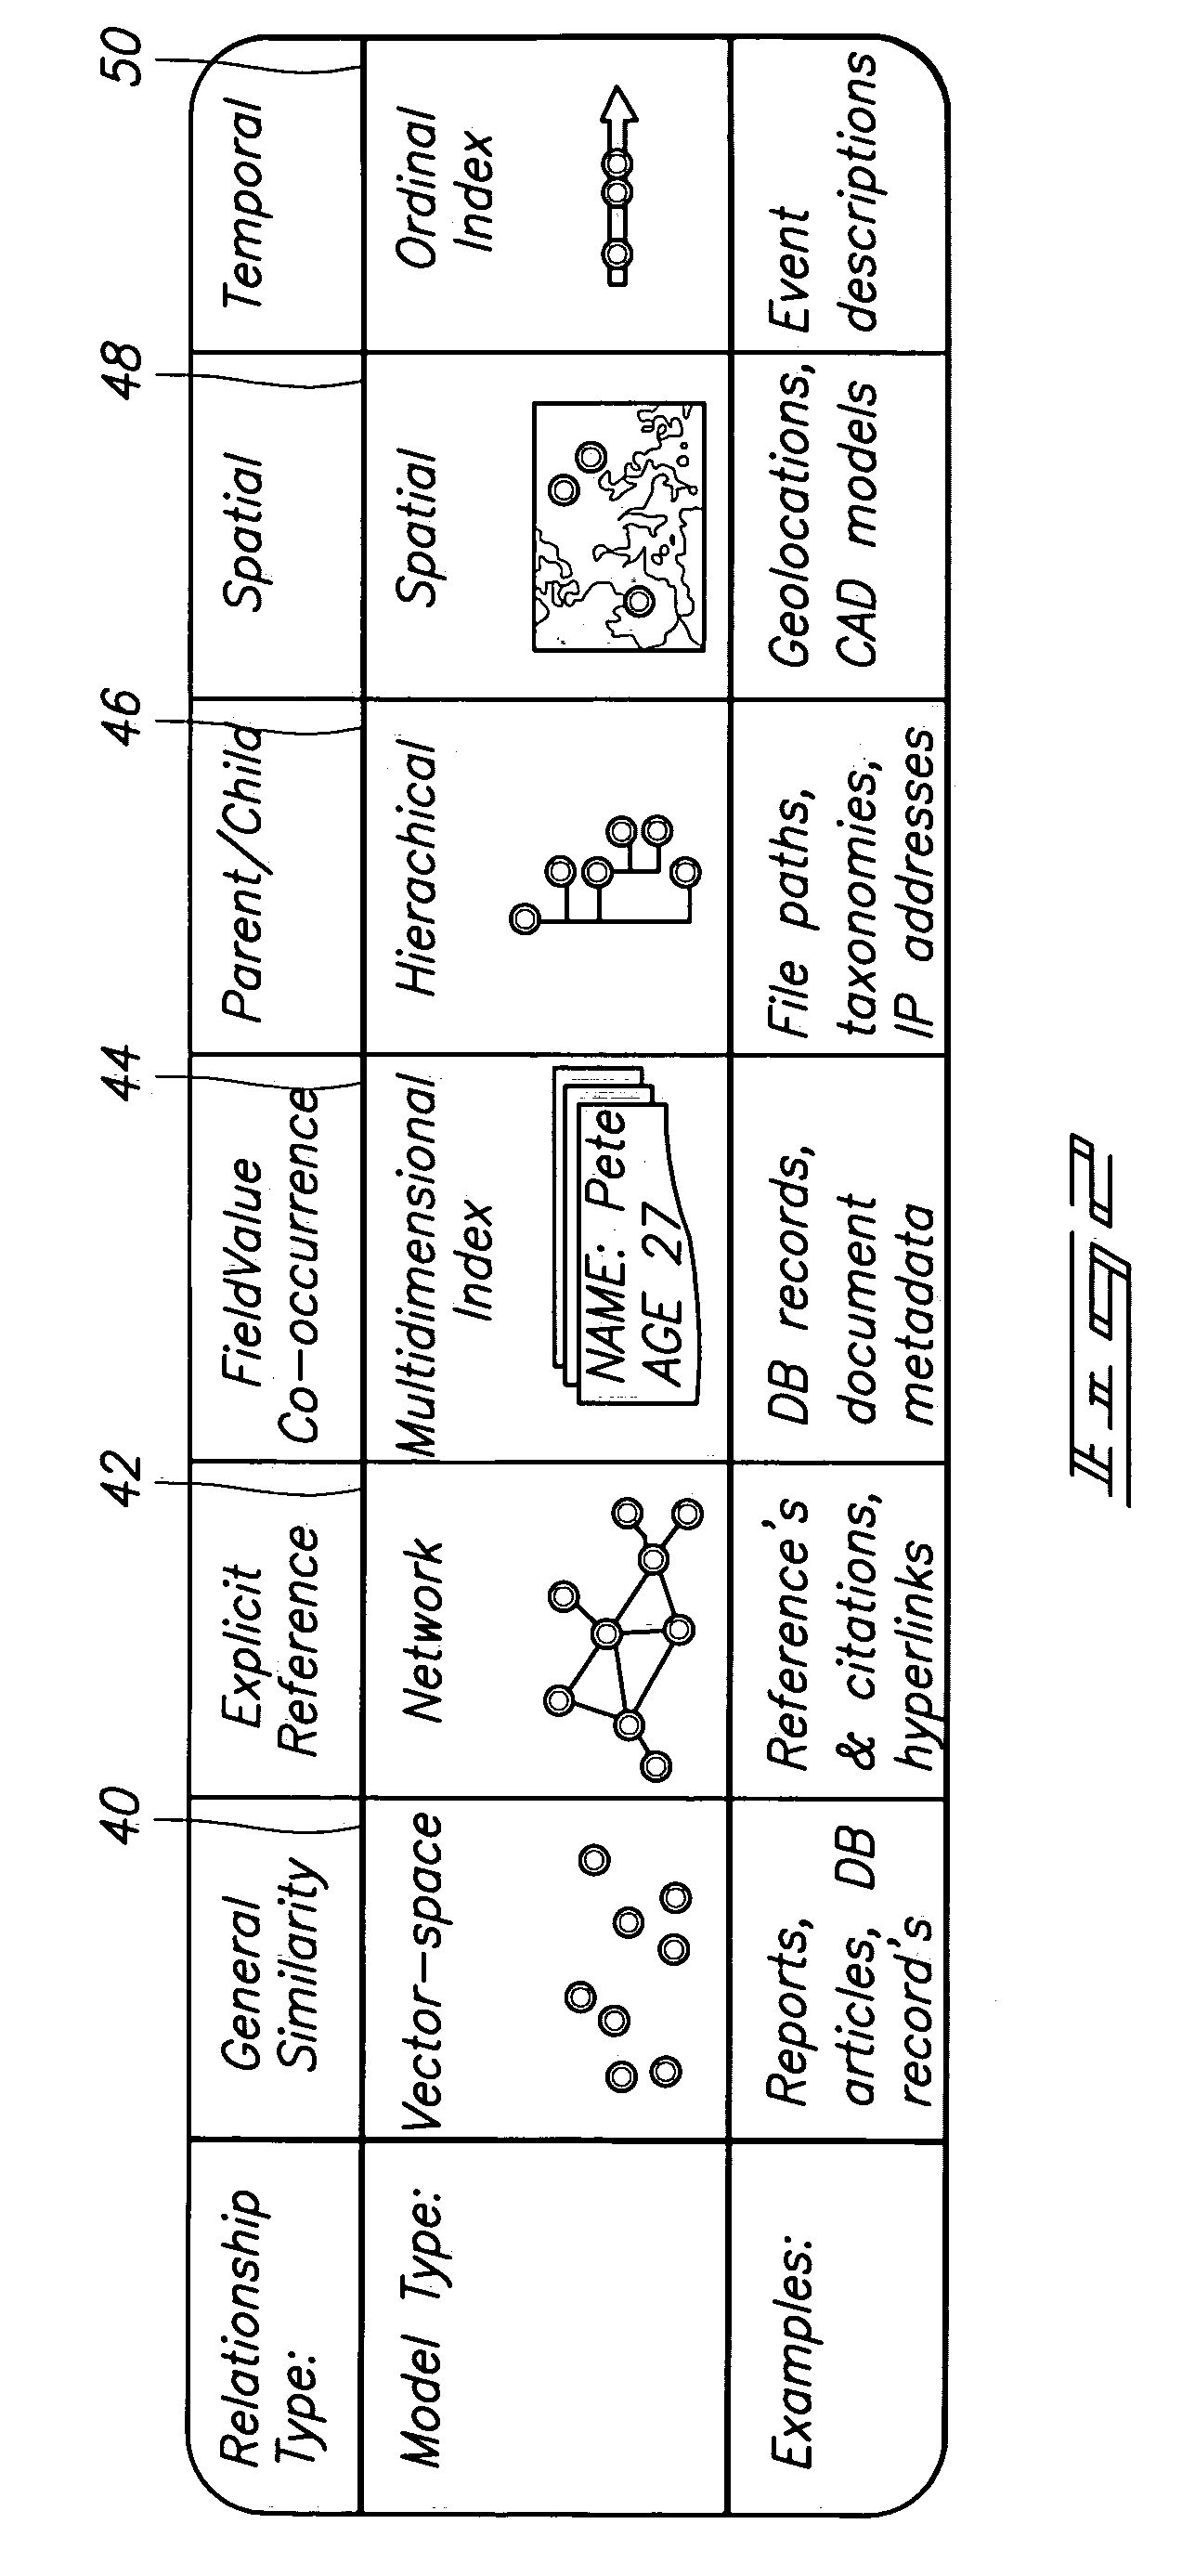 Multidimensional structured data visualization method and apparatus, text visualization method and apparatus, method and apparatus for visualizing and graphically navigating the world wide web, method and apparatus for visualizing hierarchies